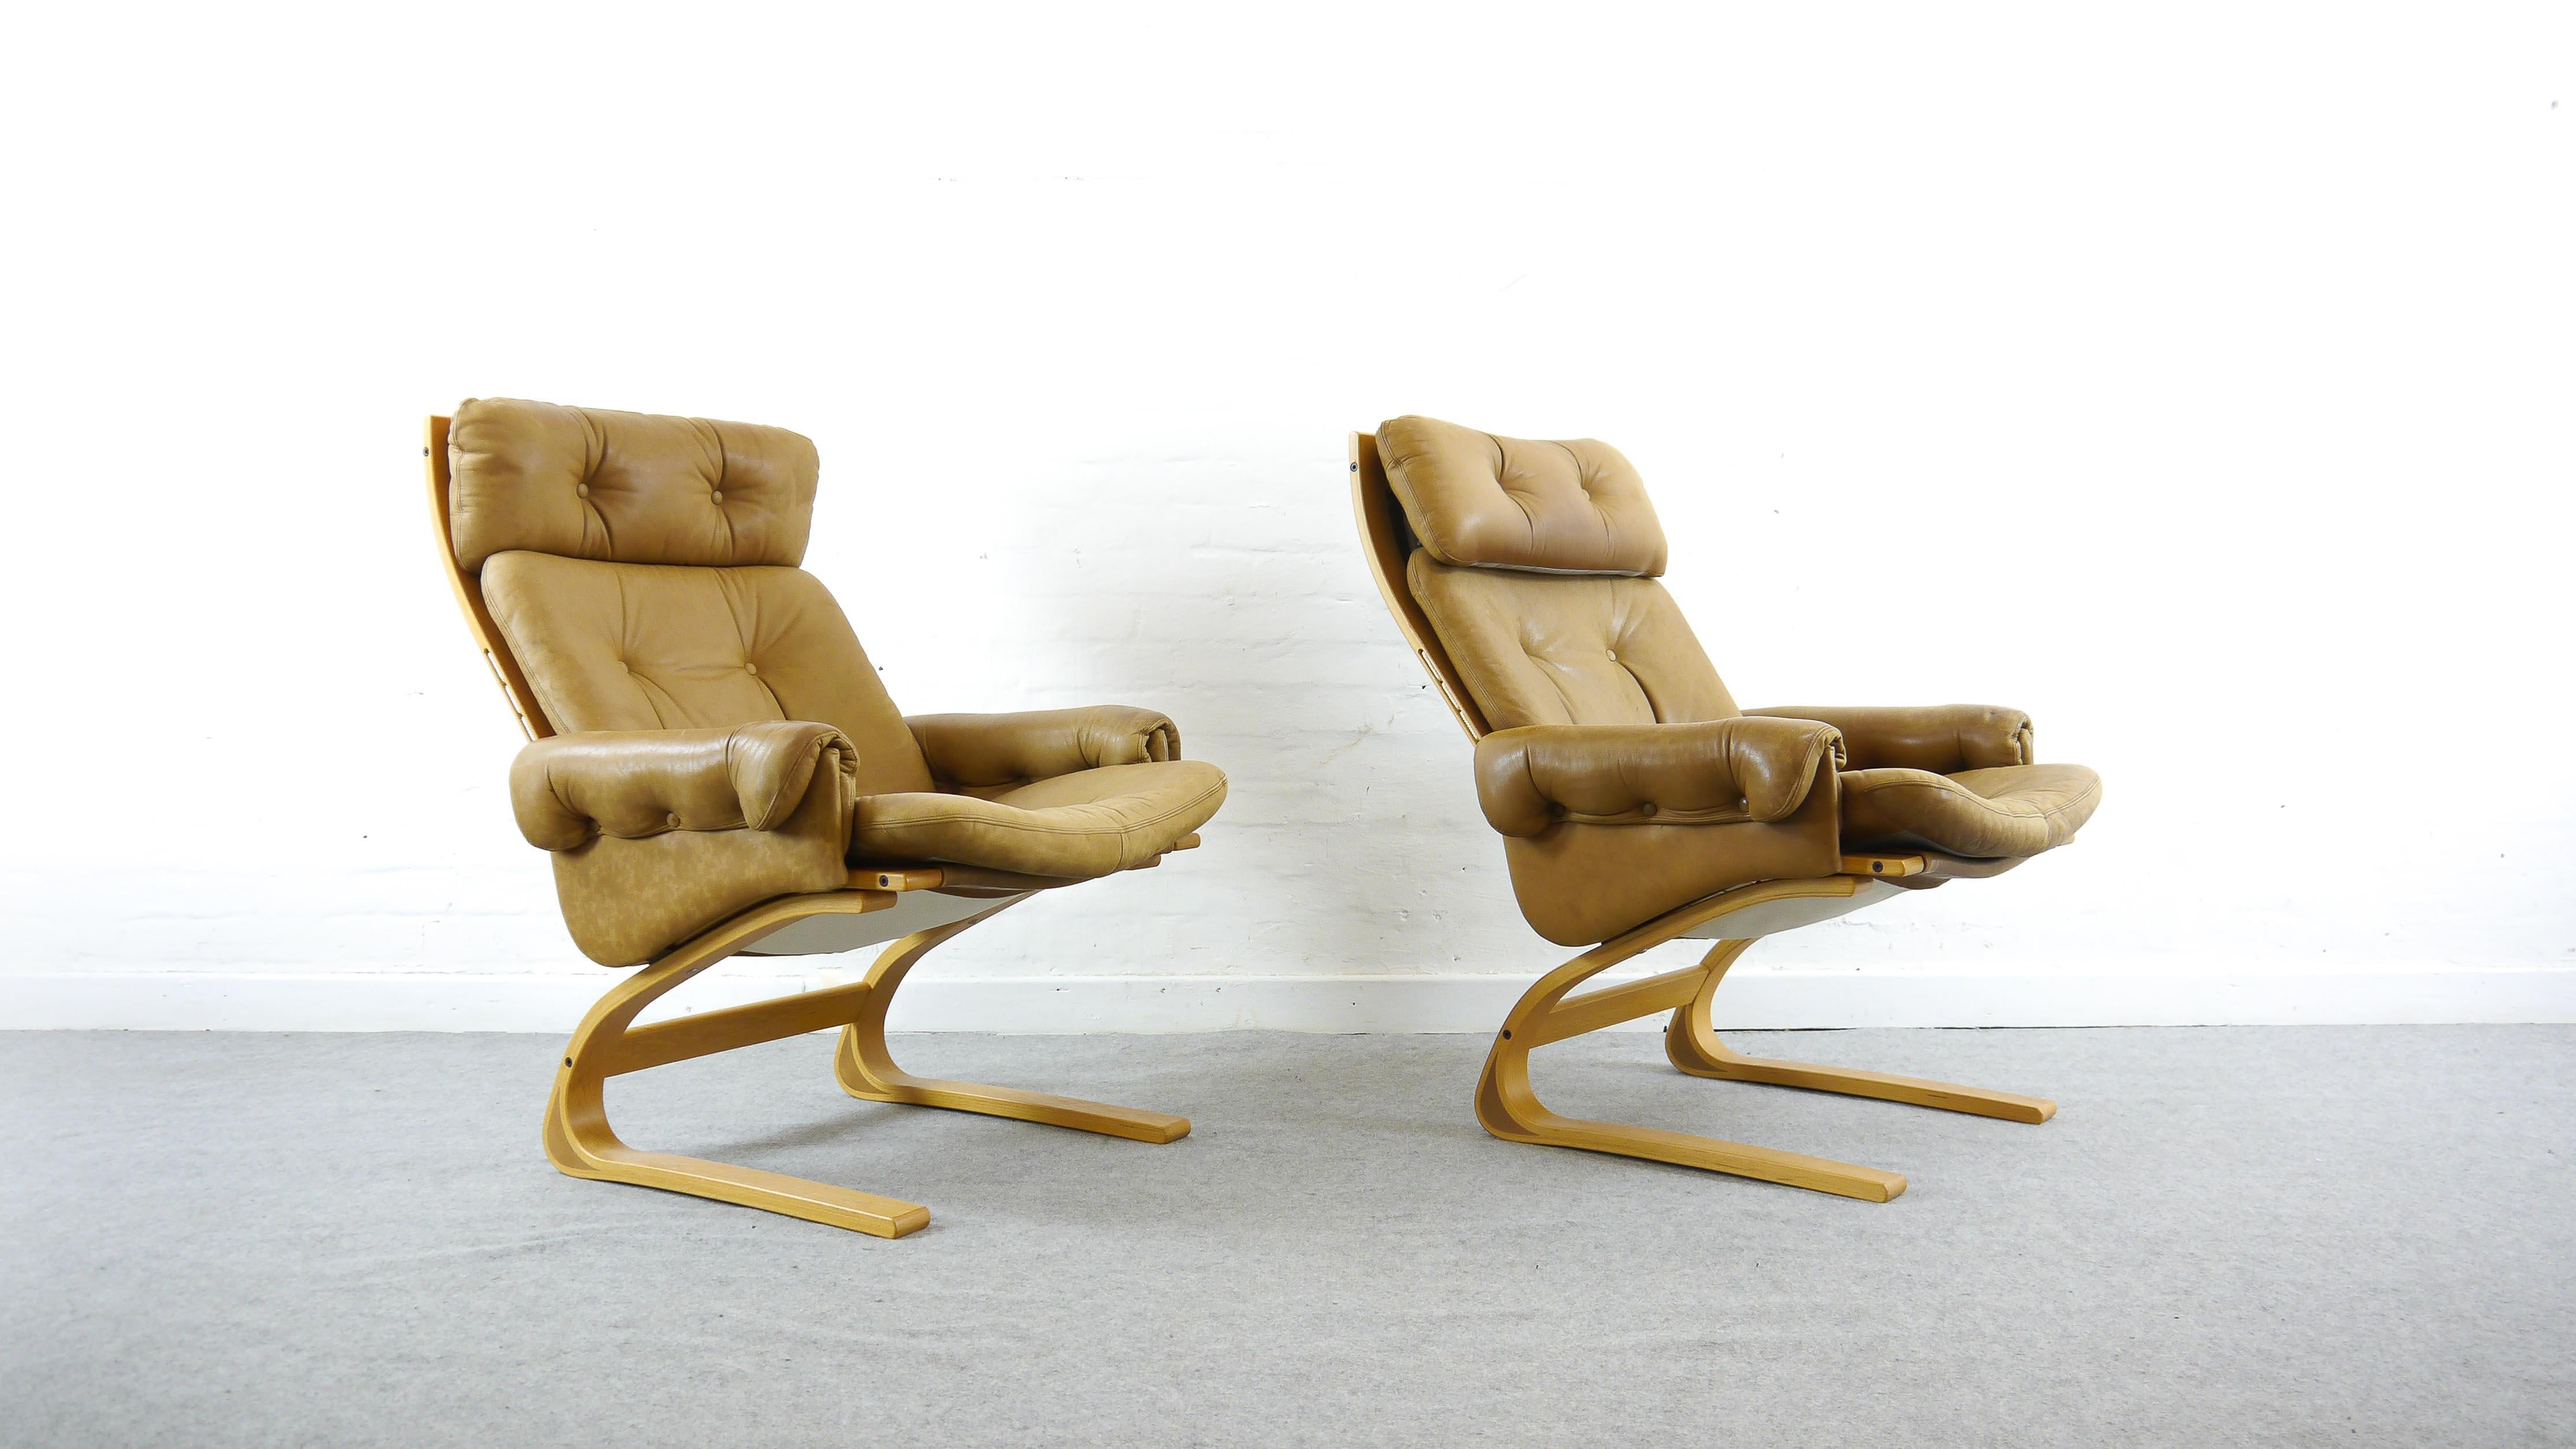 Pair (2) Kengu Lounge Chairs with high backrest by Elsa and Nordahl Solheim. Manufactured by Rybo Rykken & Co., Norway, 1970s. Upholstered in original brown or caramel leather. Cantilevered construction in wood with canvas and leather. Very